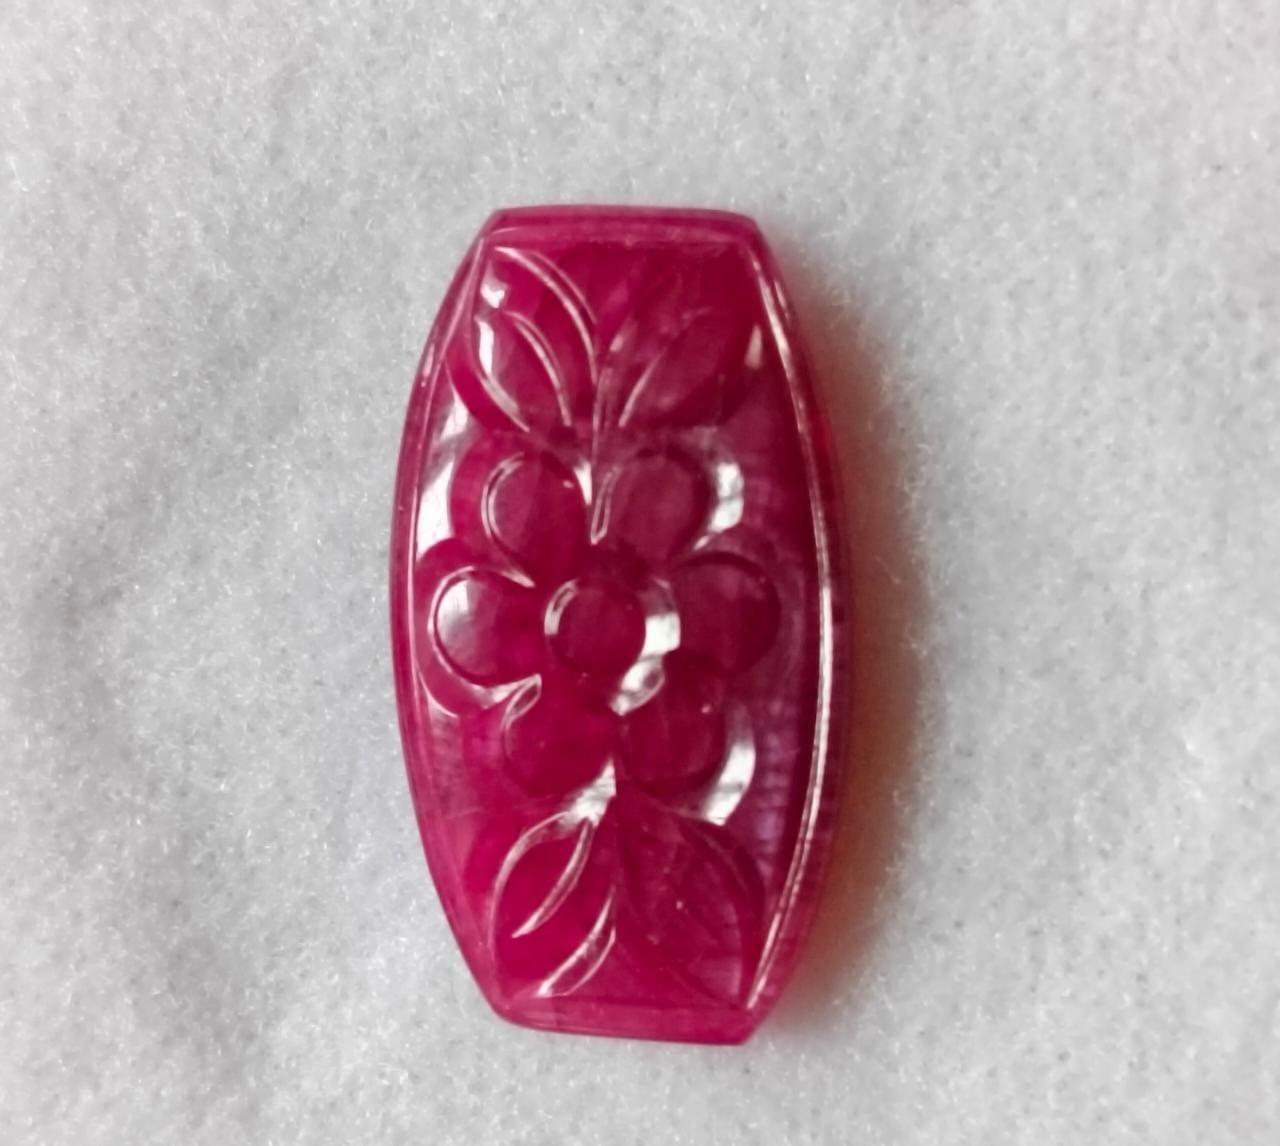 Natural Red Ruby Handmade Carving Fancy Gemstone.
14.30 Carat with a elegant Red color and excellent clarity. Also has an excellent fancy carving with ideal polish to show great shine and color . It will look authentic in jewelry. The dimensions of